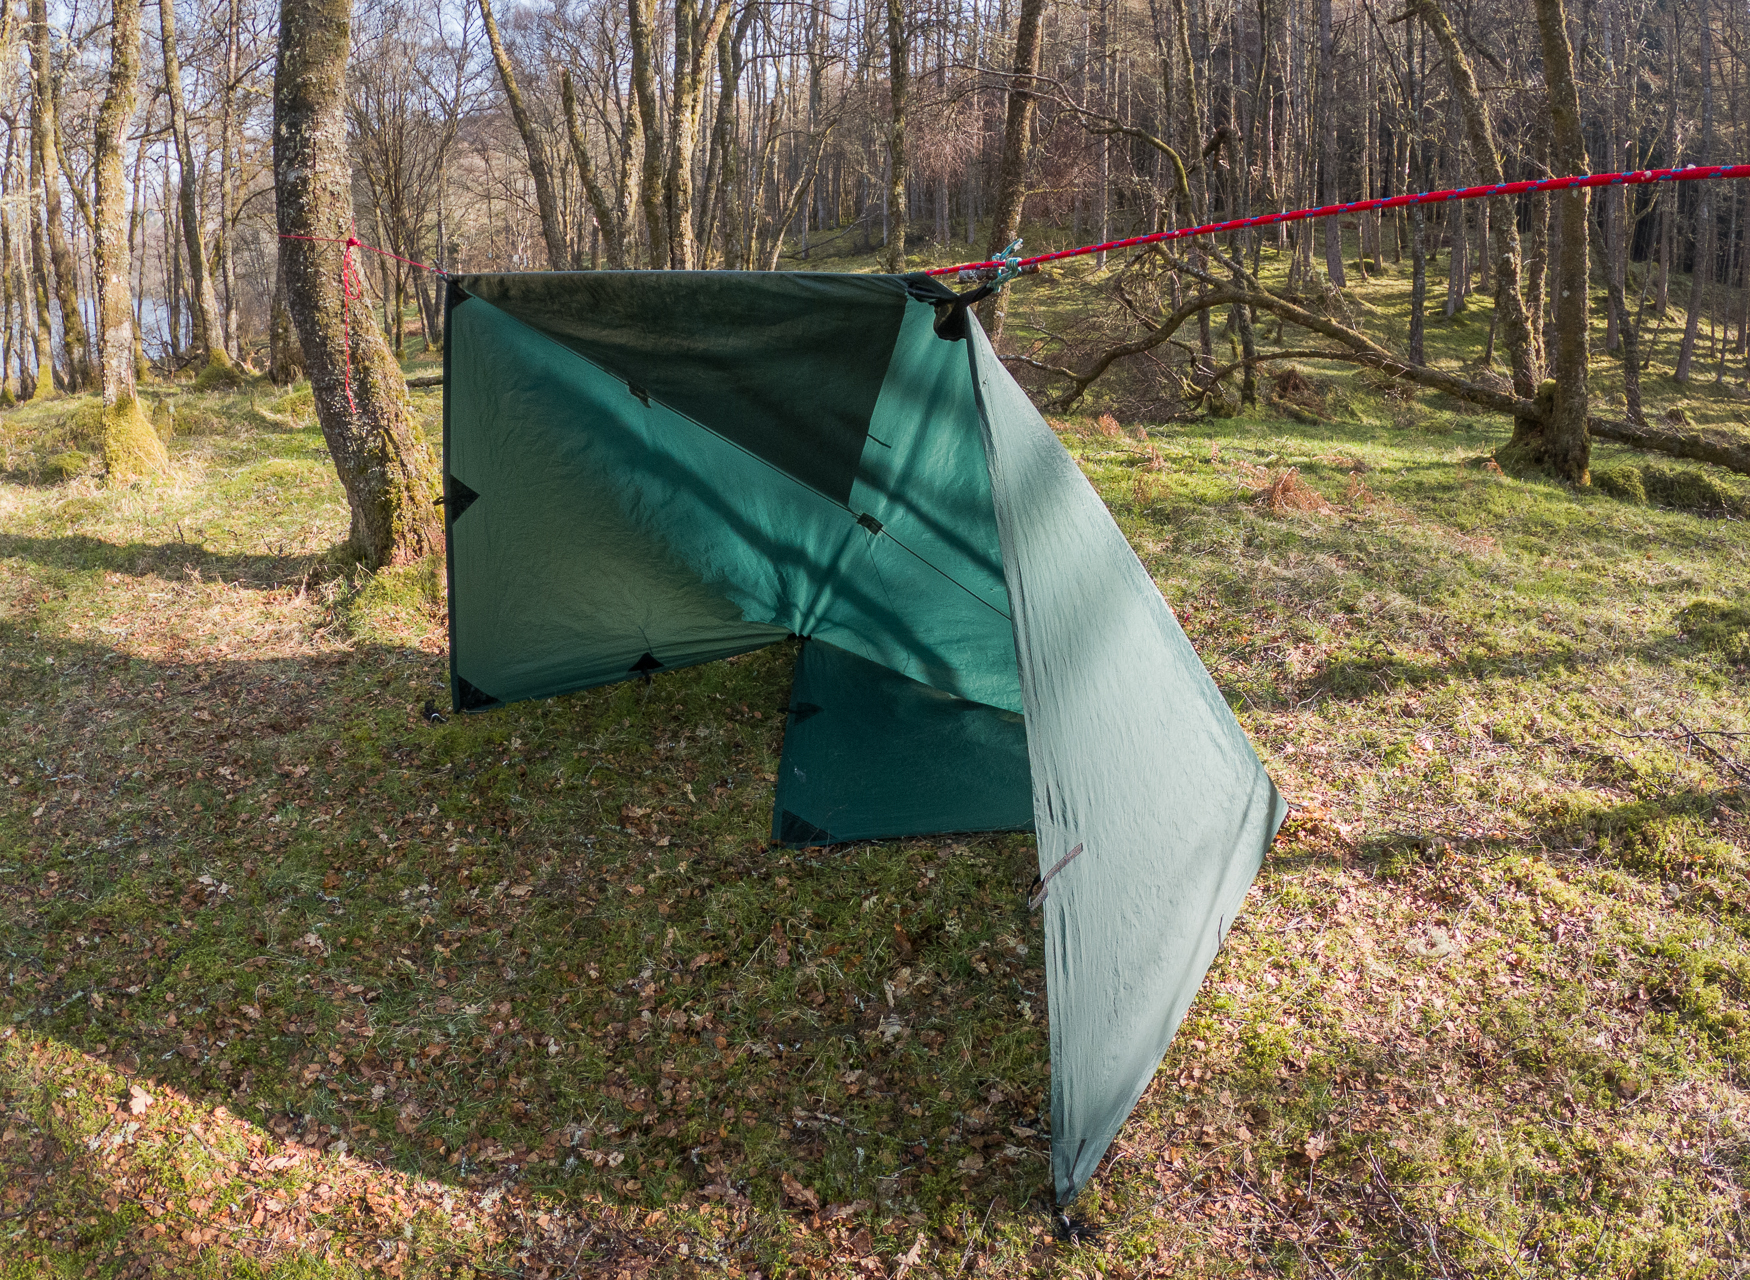 How To Build Tarp Shelters Using These 5 Easy Designs - The Manual